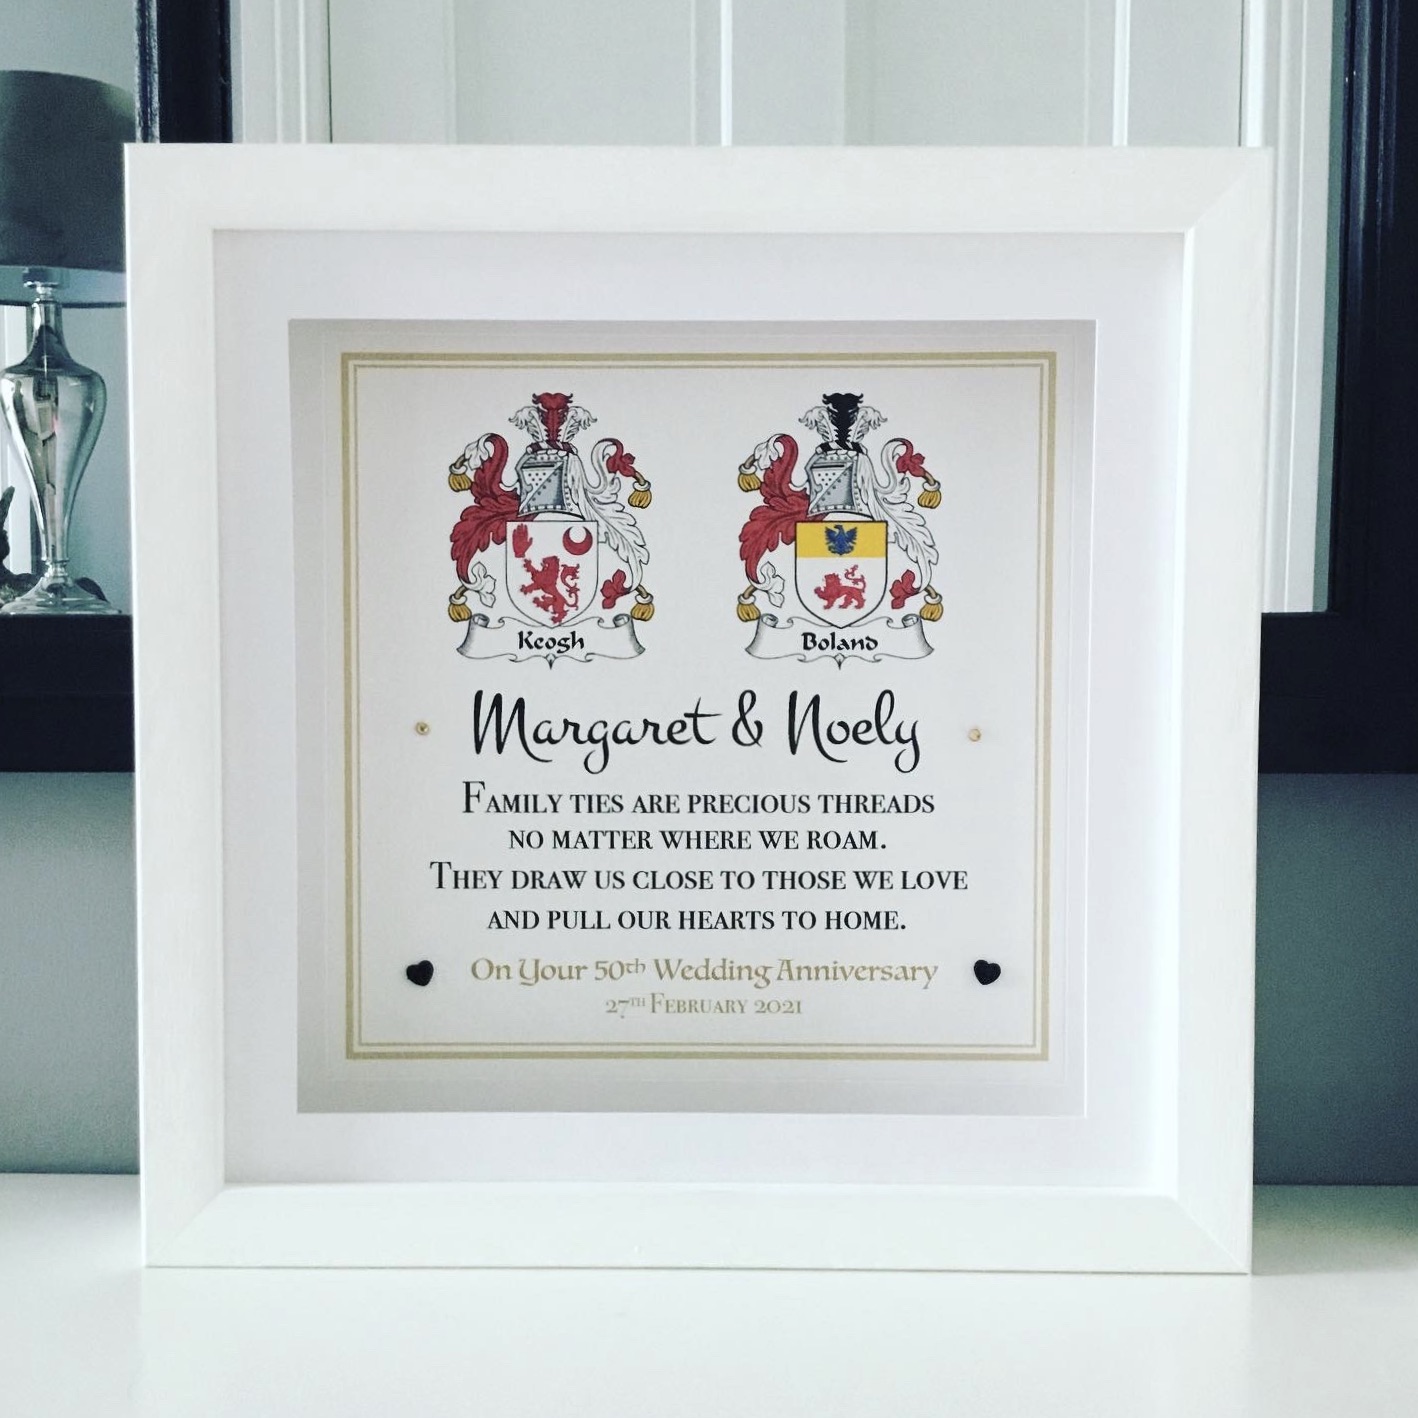 WEDDING ANNIVERSARY,GIFT PERSONALISED FAMILY SURNAME HISTORY CREST COAT OF ARMS 